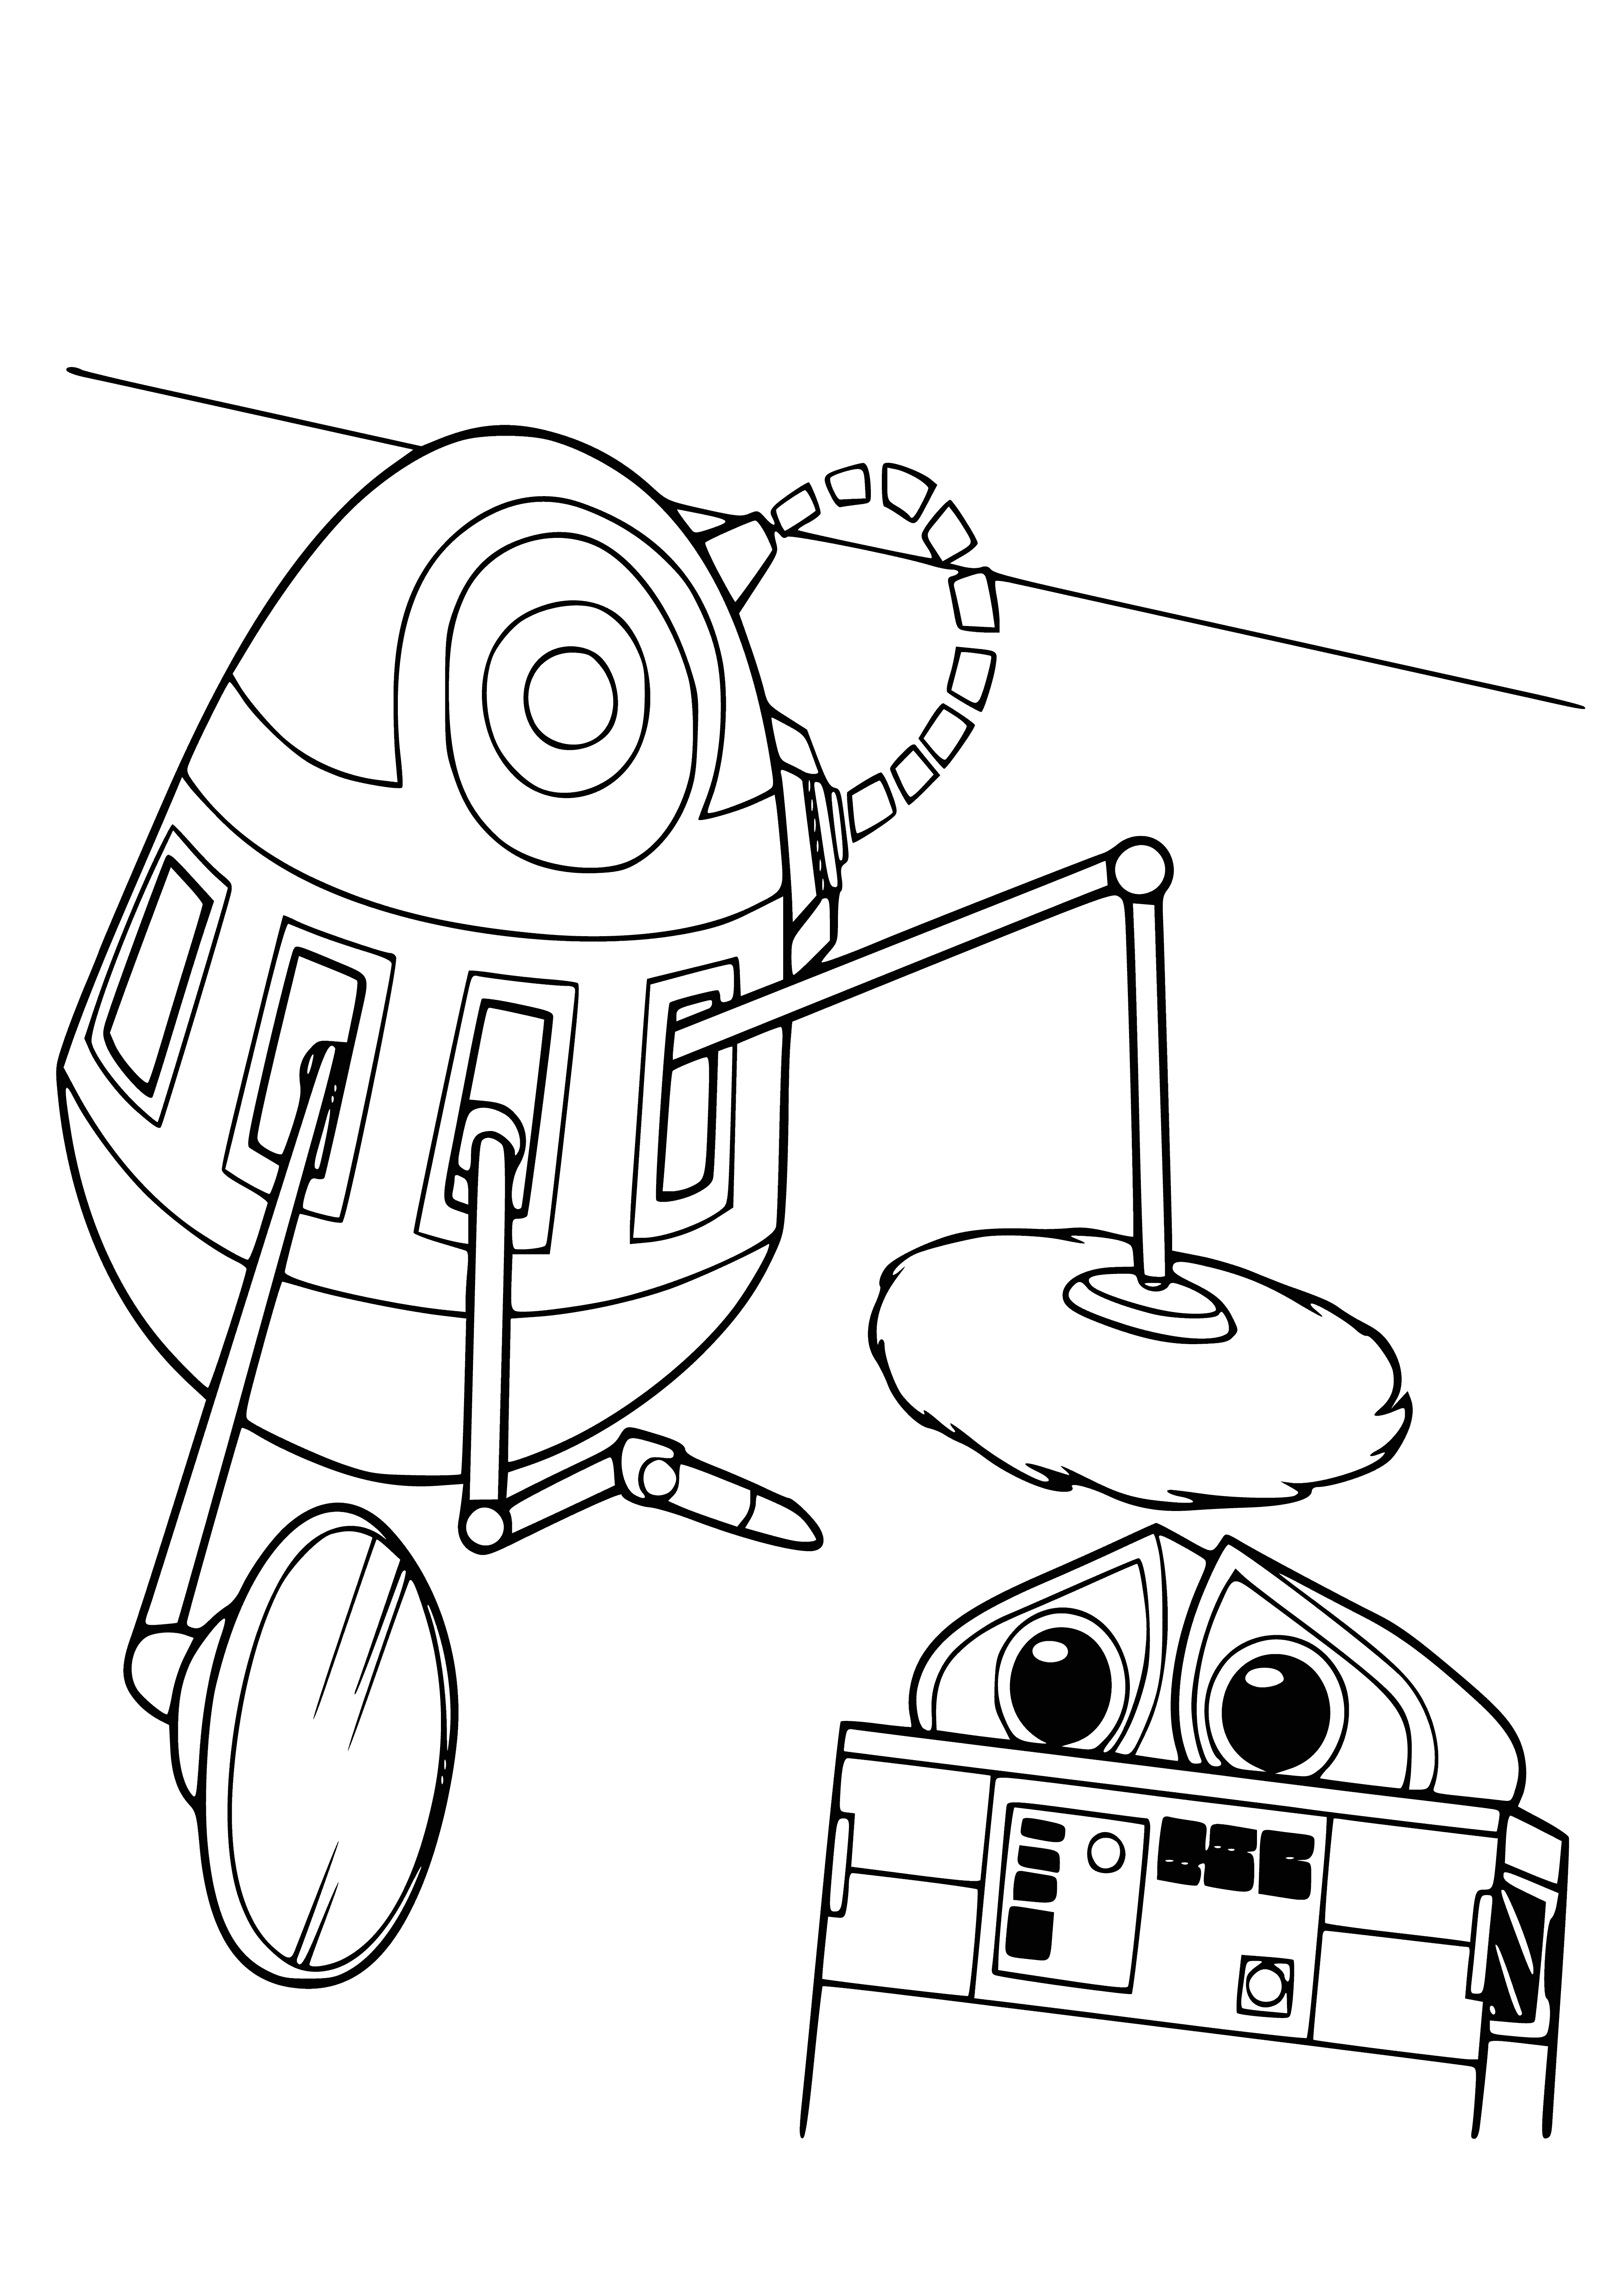 Robot and Valley coloring page